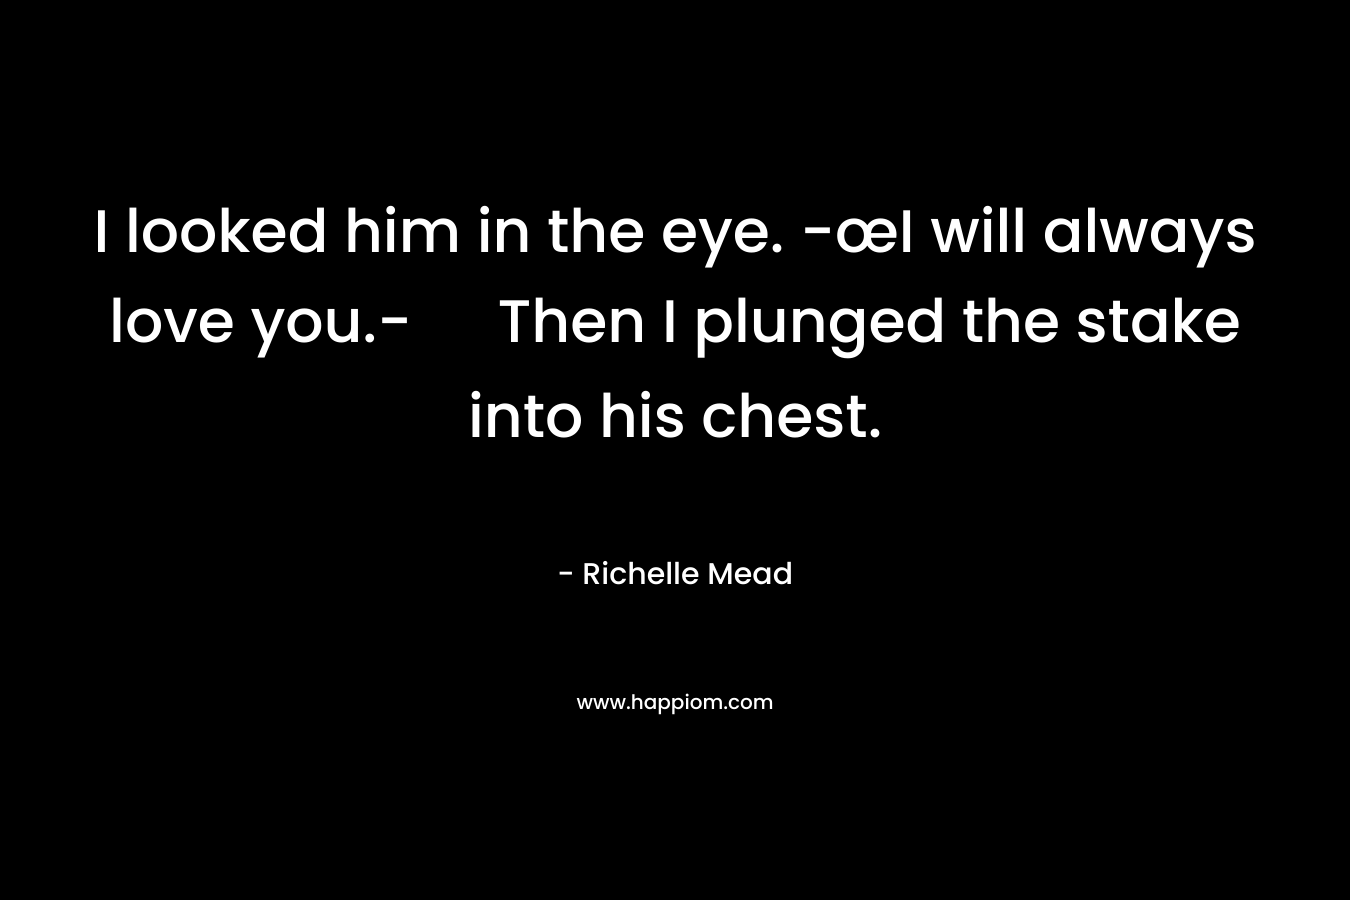 I looked him in the eye. -œI will always love you.- Then I plunged the stake into his chest. – Richelle Mead